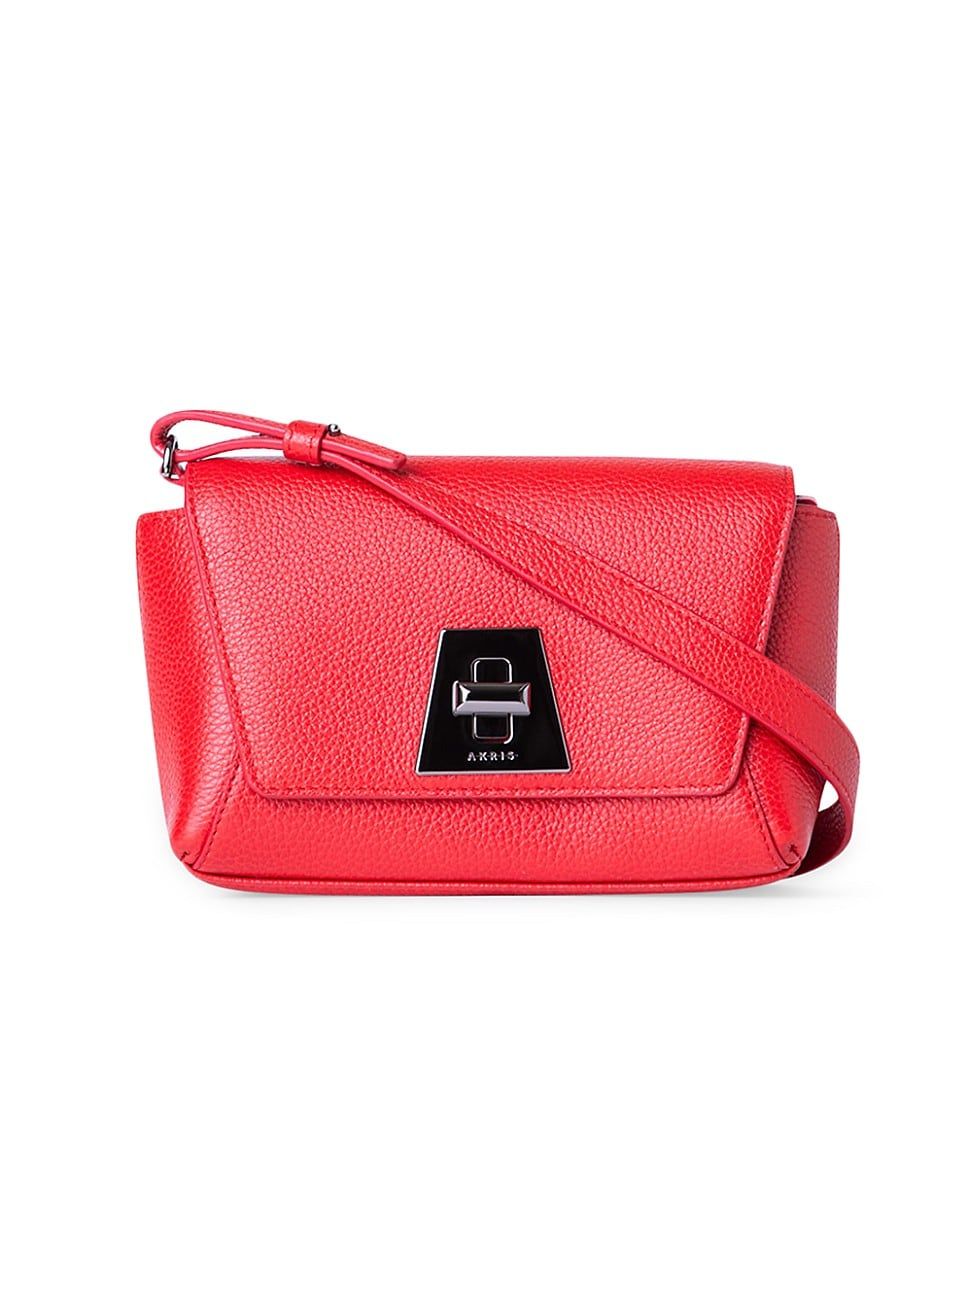 Buy Lipstick Shape Design Crossbody Bag, Ustyle Evening Shopping Street  Shoulder Bag Cell Phone Women Girl Cute Party Purse (red) at Amazon.in